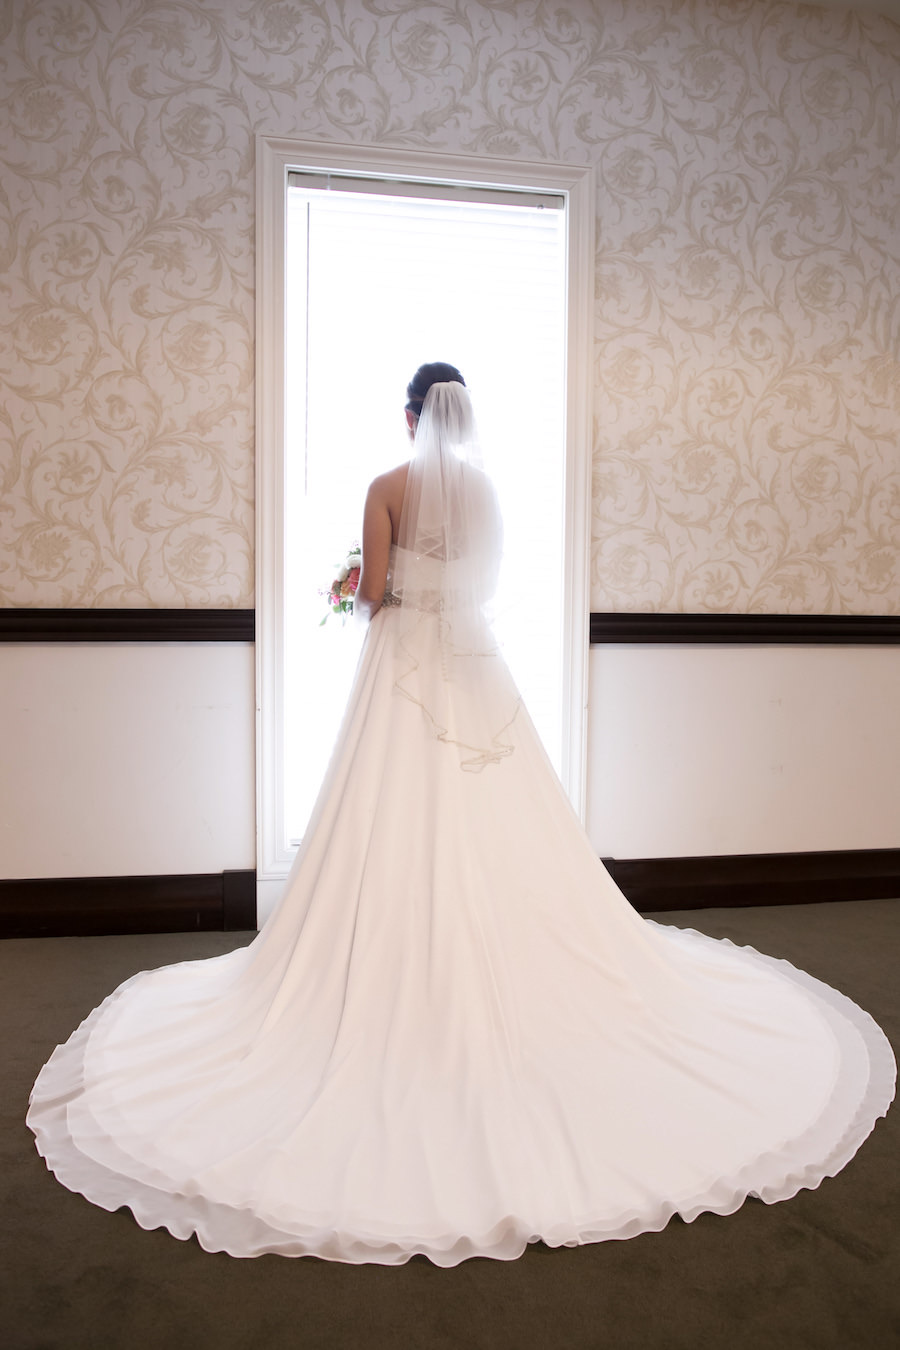 Lithia, Indoor Bridal Wedding Portrait in Ivory Wedding Dress and Veil | Tampa Wedding Photographer Carrie Wildes Photography